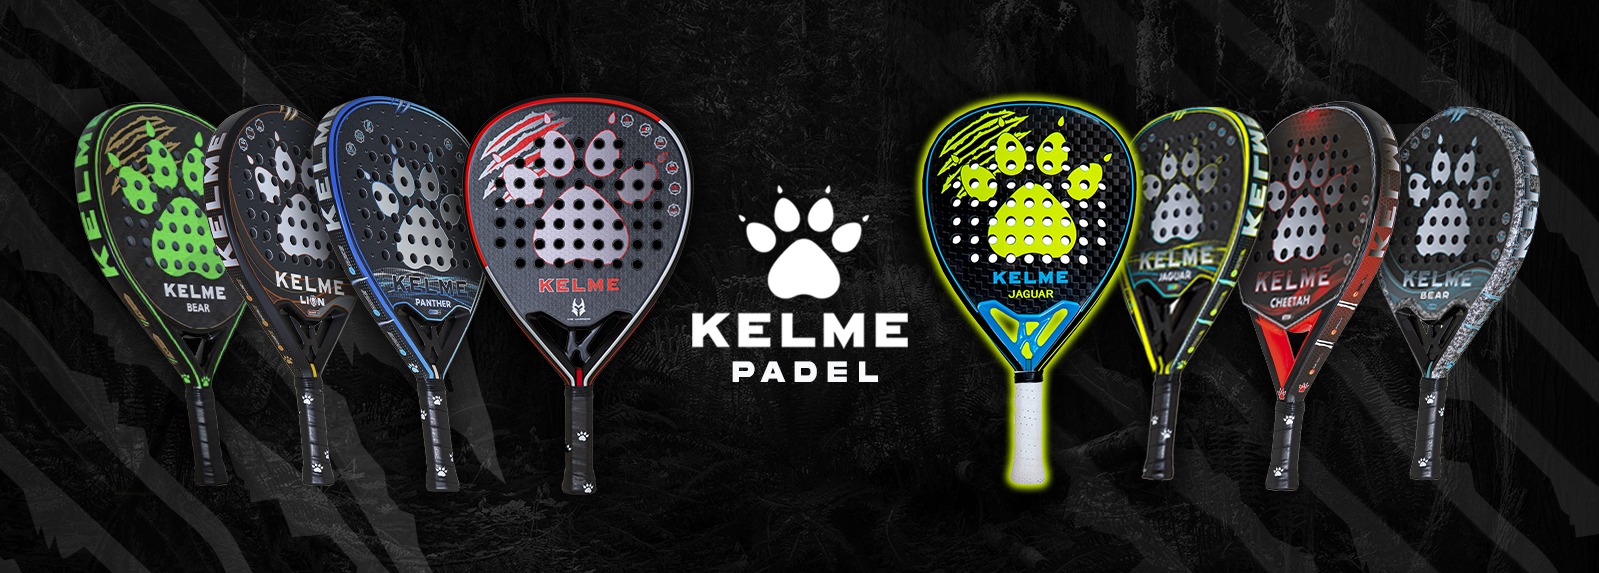 Products 4 sl, Pádel